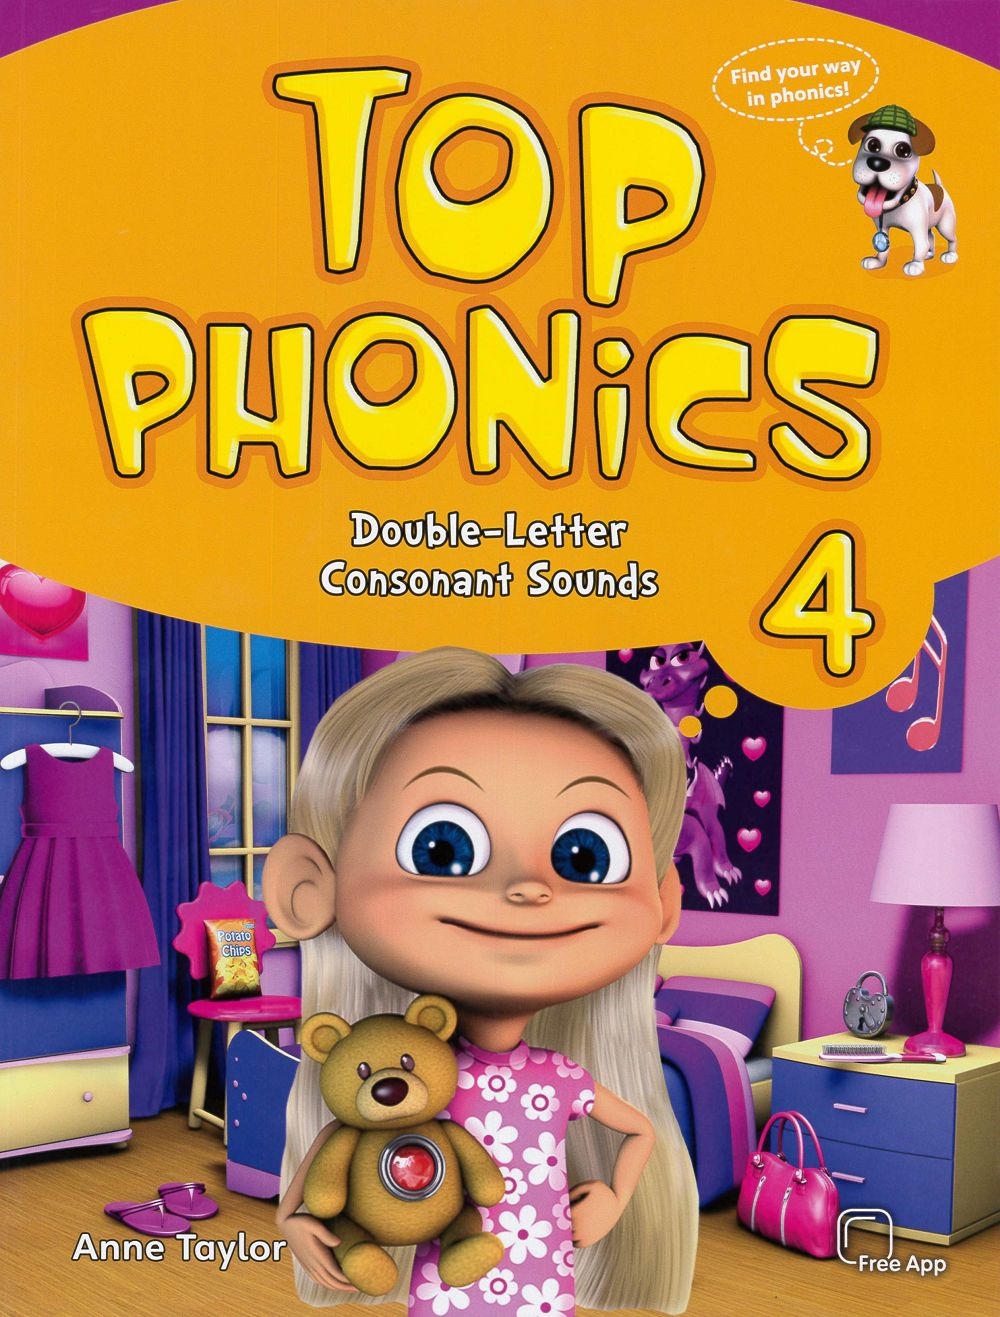 Top Phonics (4) Student Book with APP